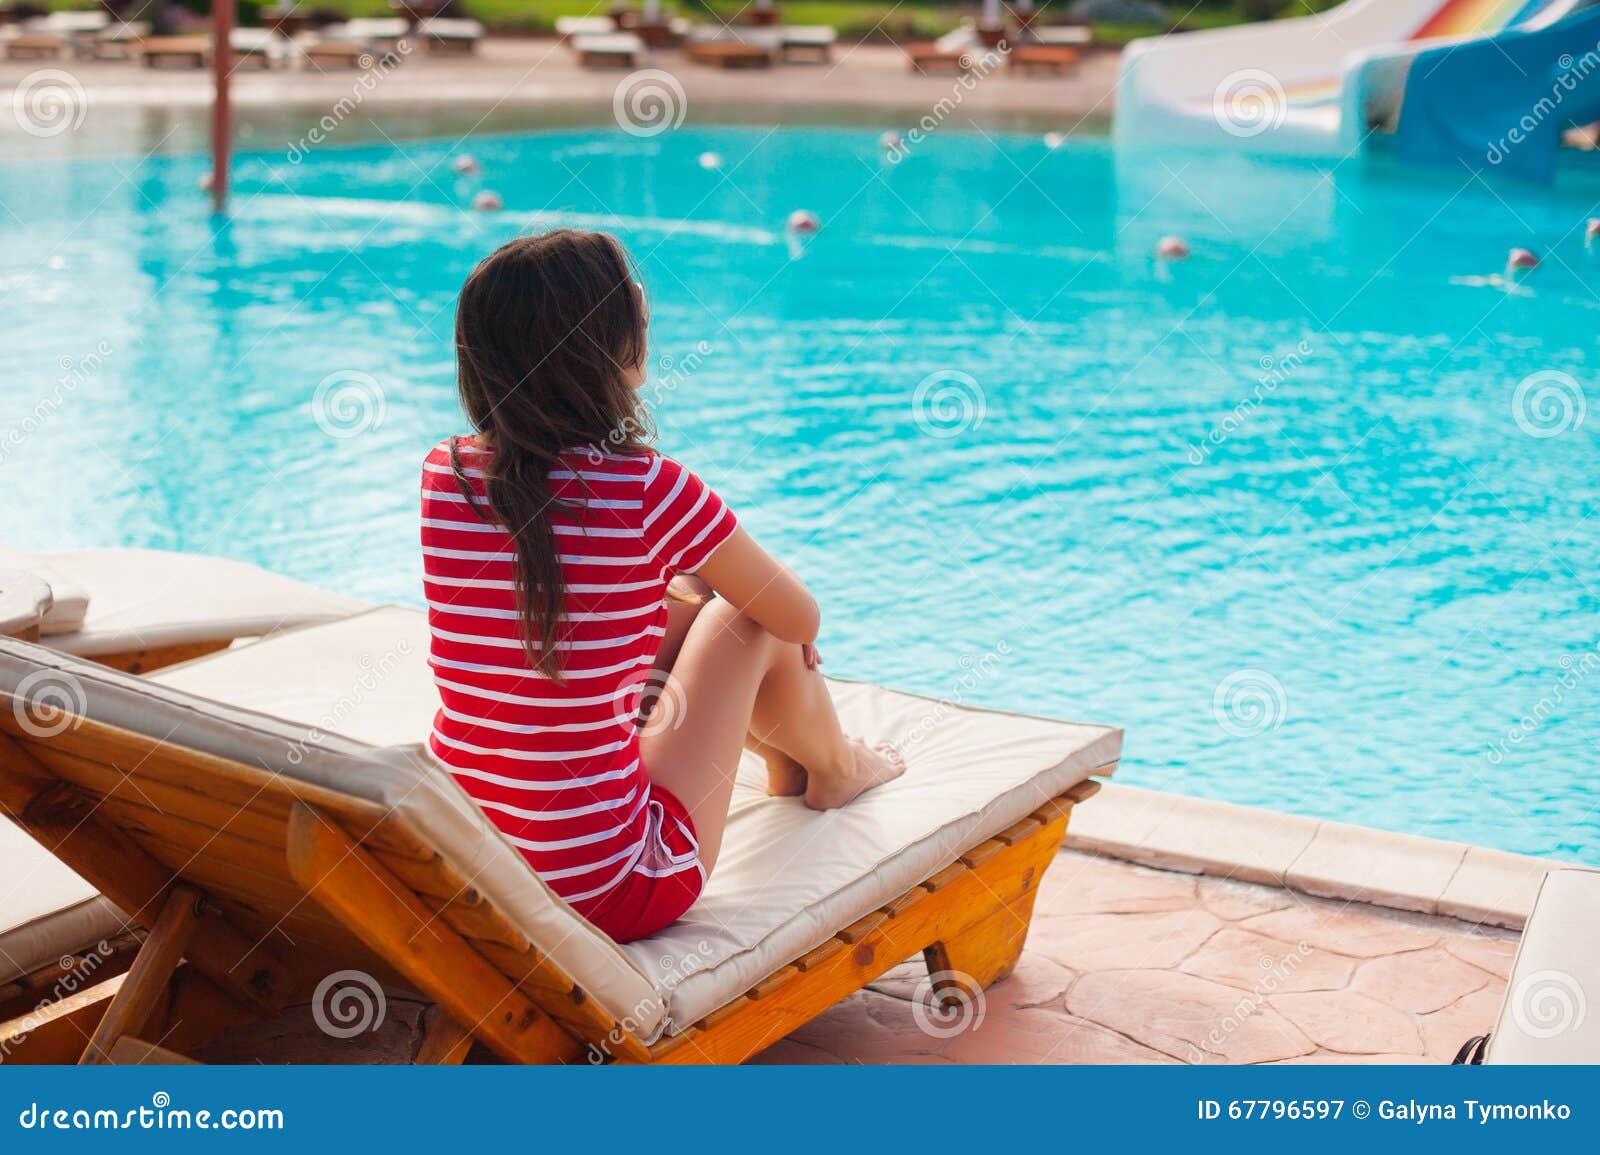 Beautiful Woman Sitting On A Lounger Pool Background Stock Image